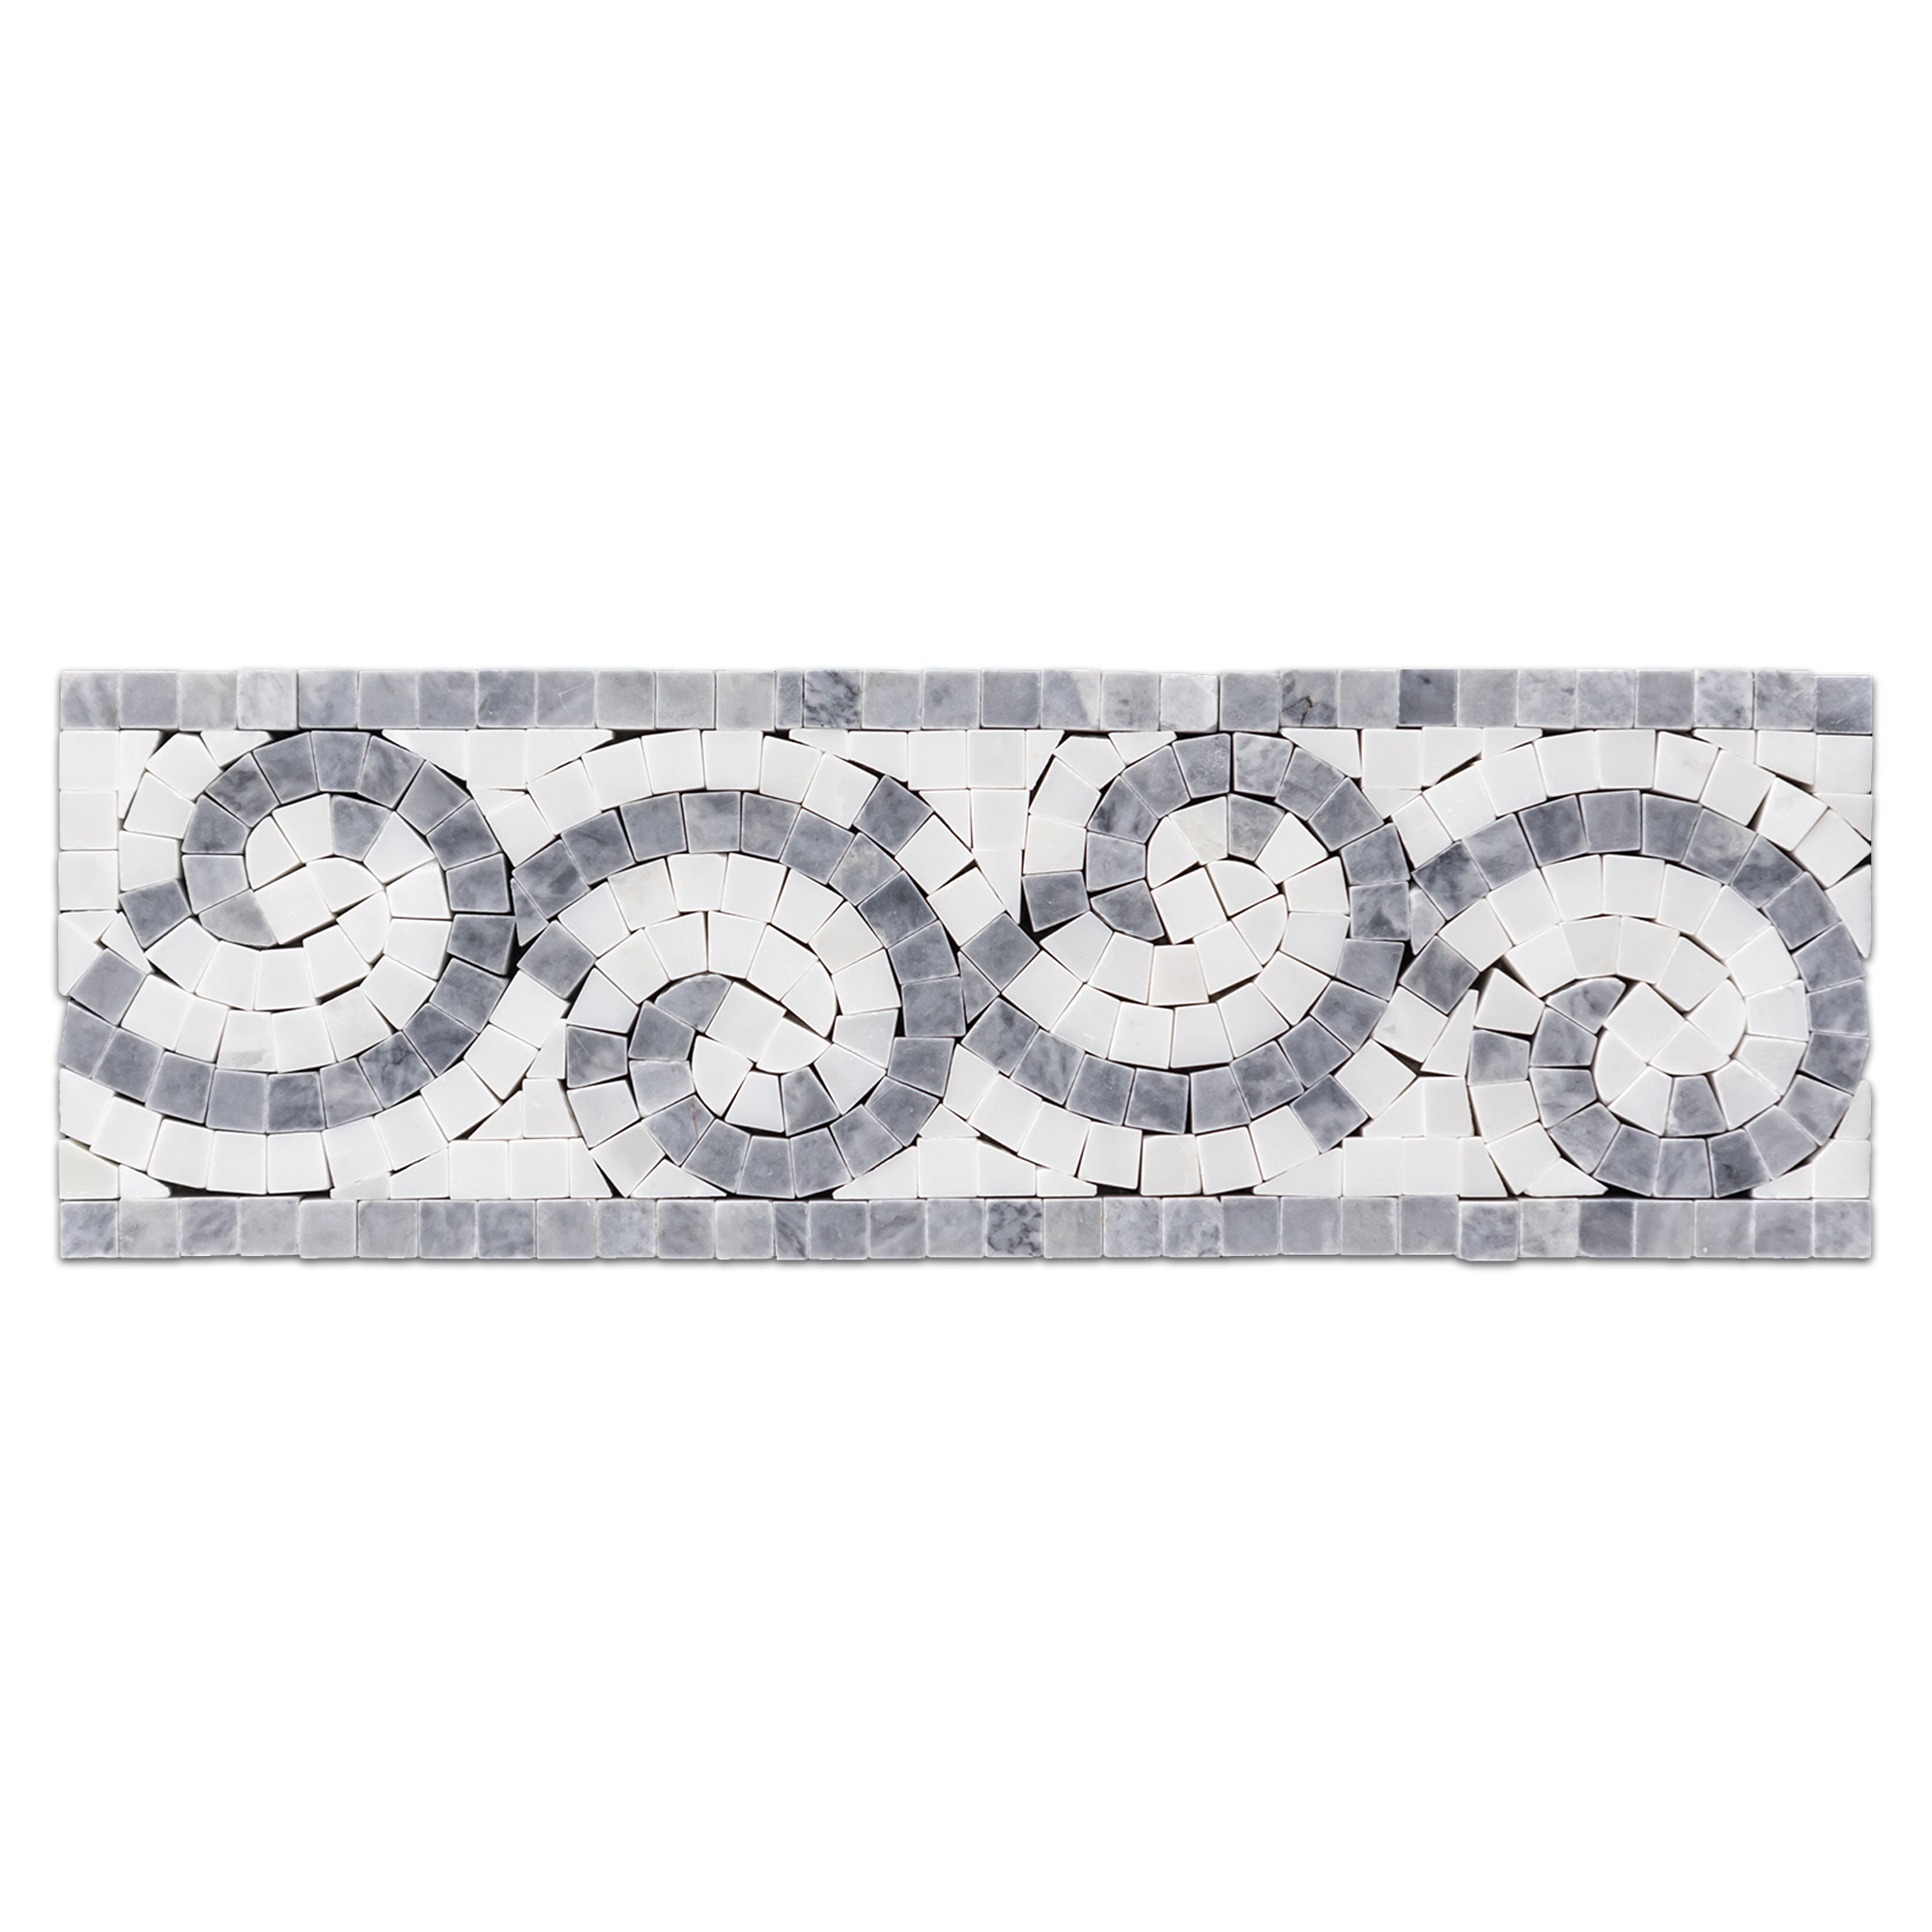 Elon Pacific Gray Pearl White Marble Wave Border Corner Mosaic 4x12x0.375 Polished AM1004P C Surface Group International Product